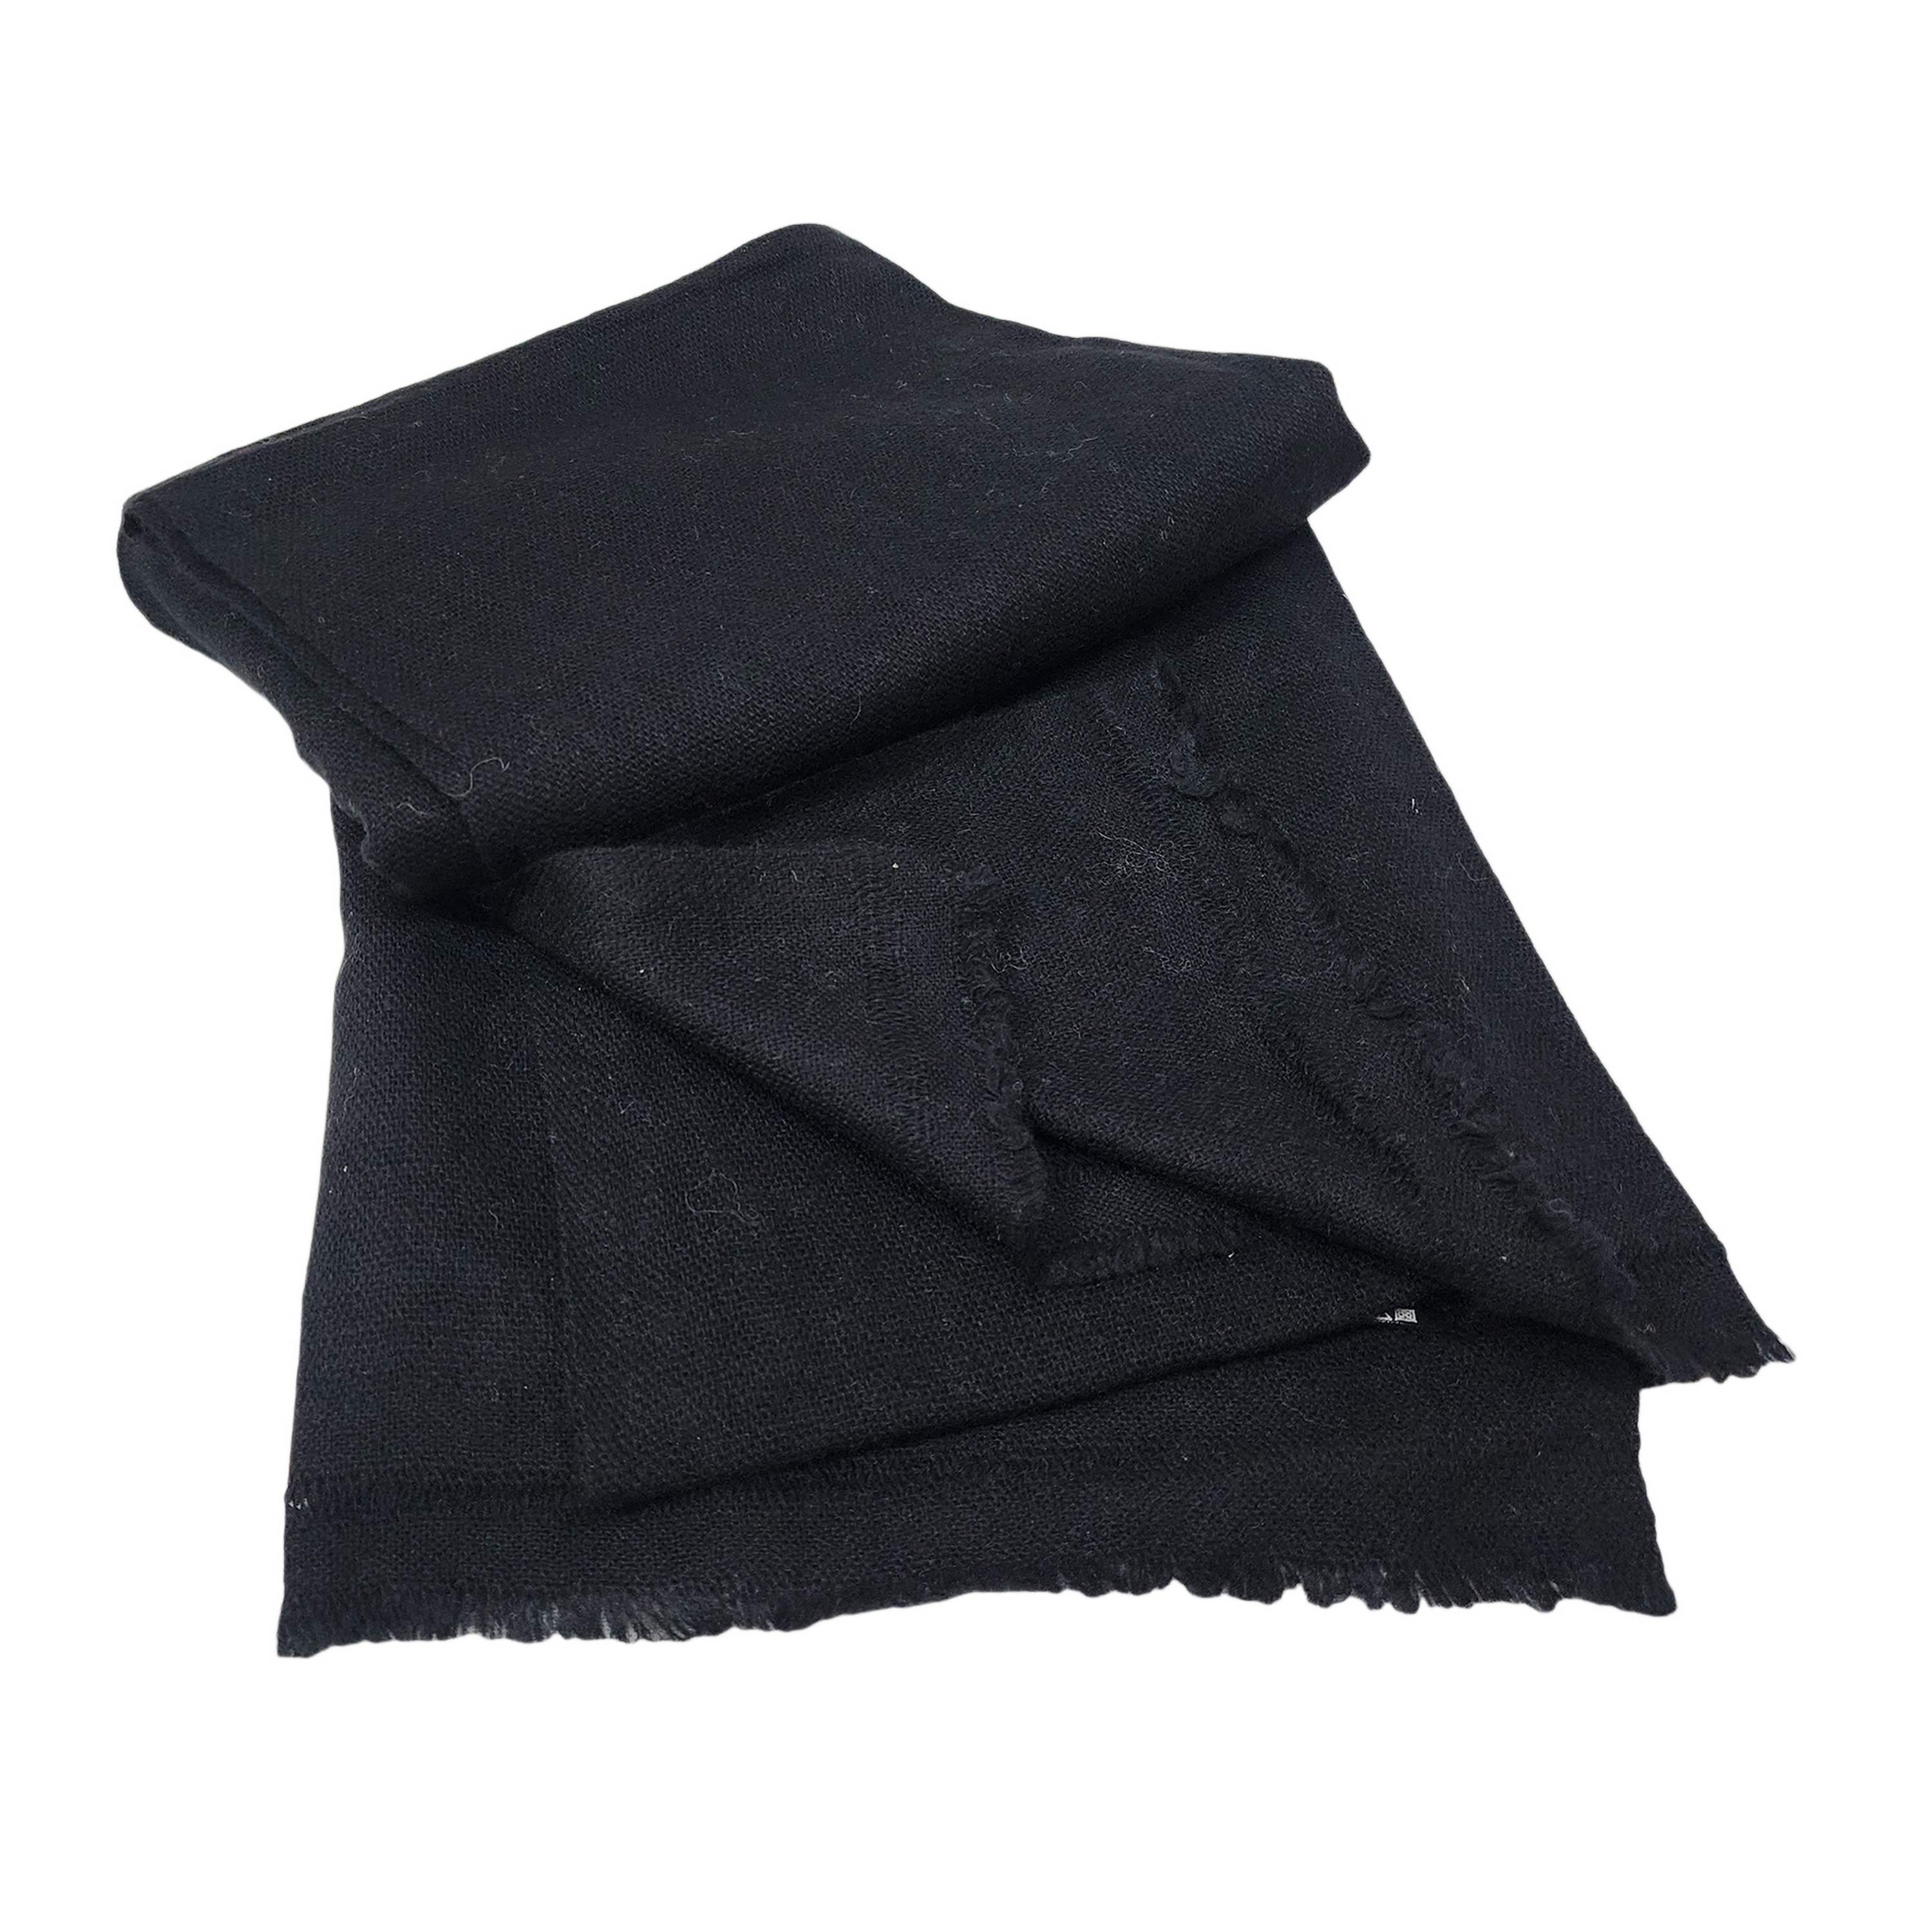 Pashmina Shawl, Nepali Handmade Shawl, In Four Ply Wool, Color charcoal